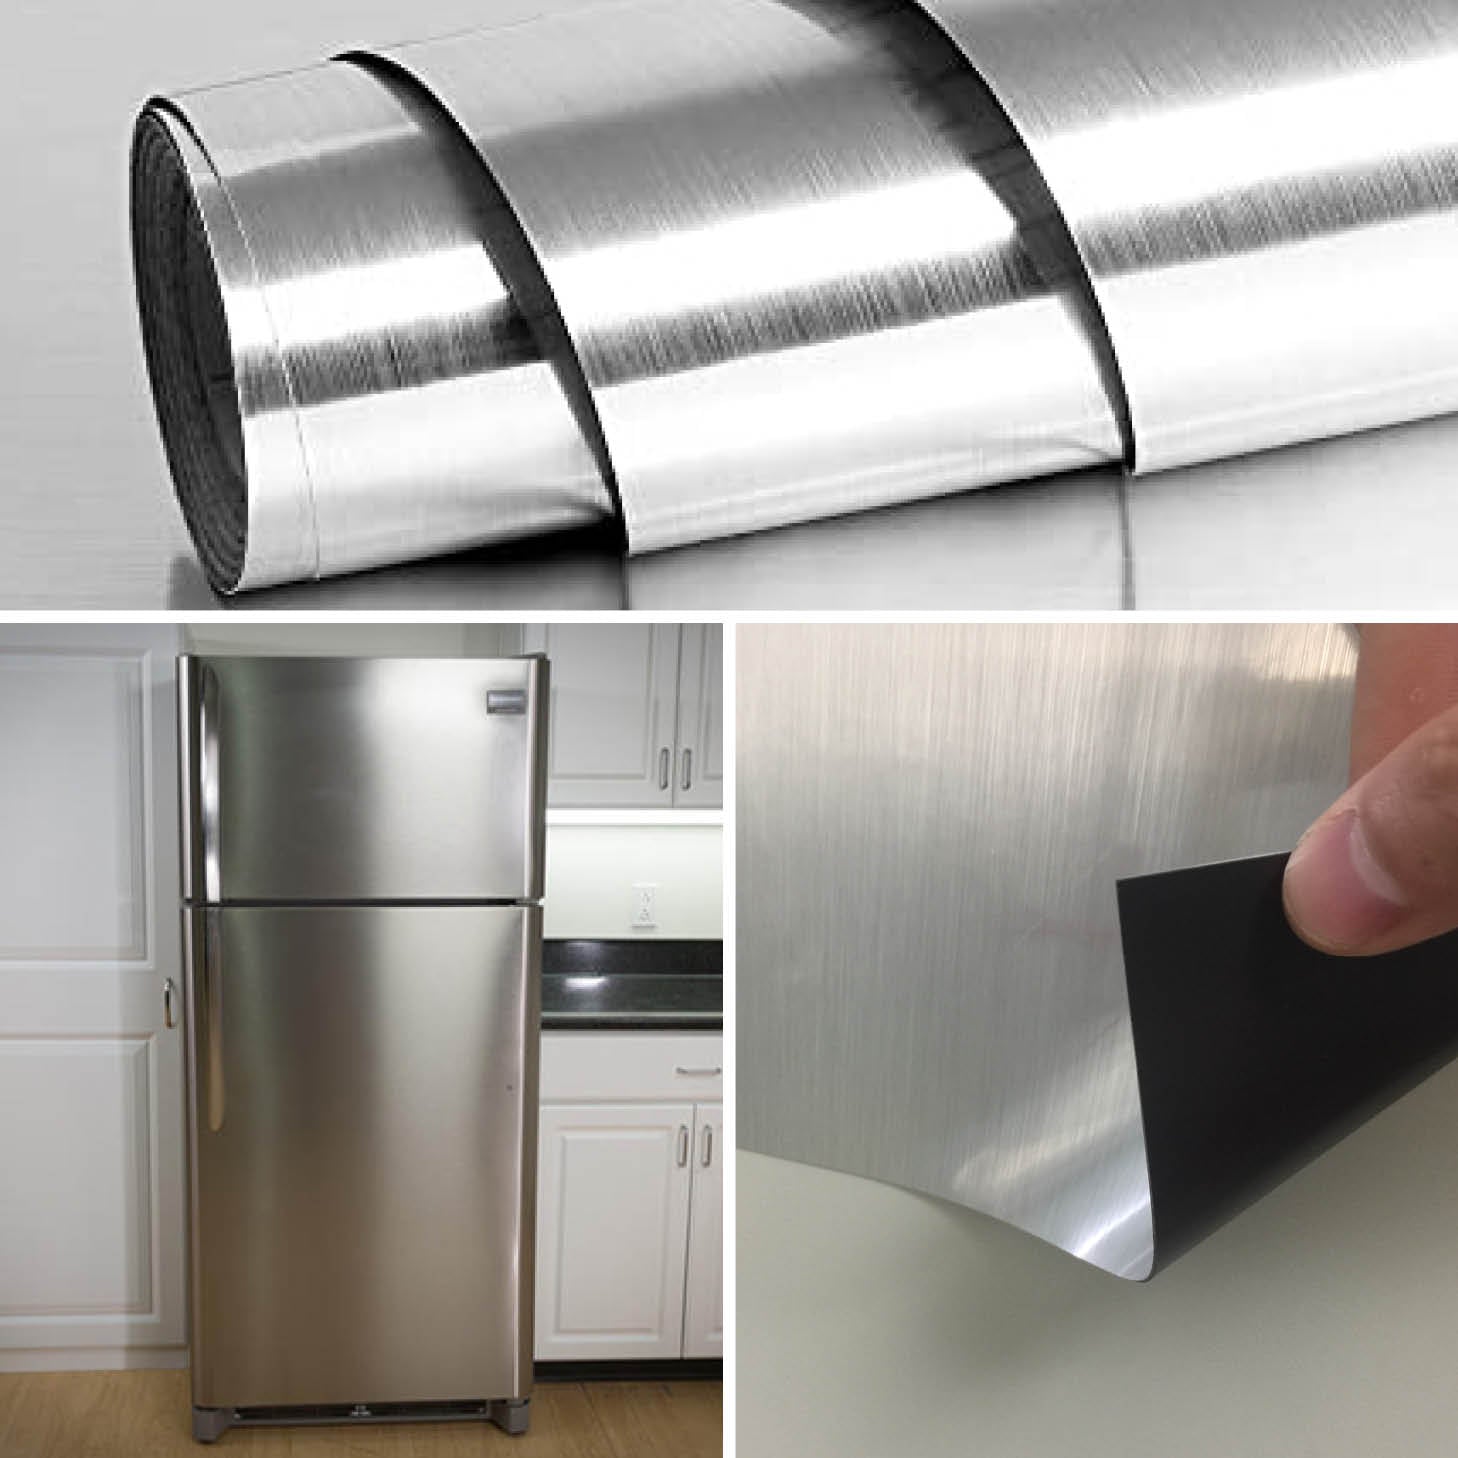 3 images in one, stainless steel magnet roll, stainless steel refrigerator cover on fridge and sample of stainless steel magnet skin show the top side and magnetic bottom side